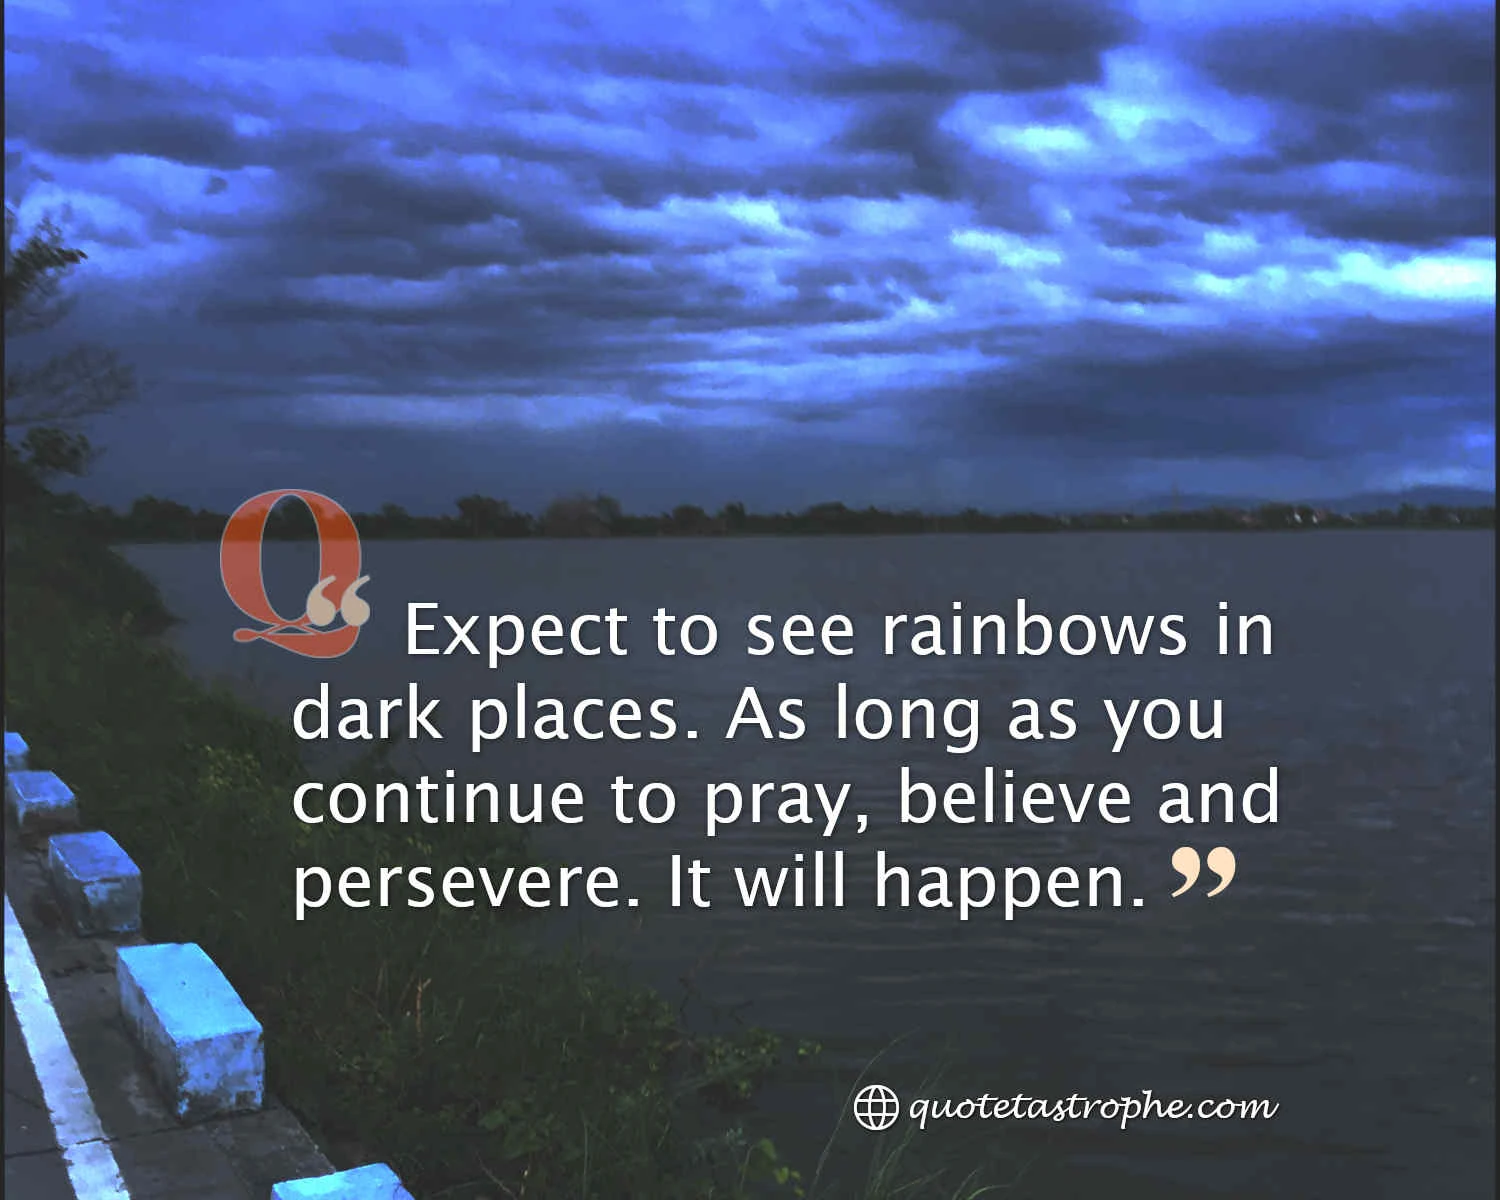 Expect To See Rainbows in Dark Places